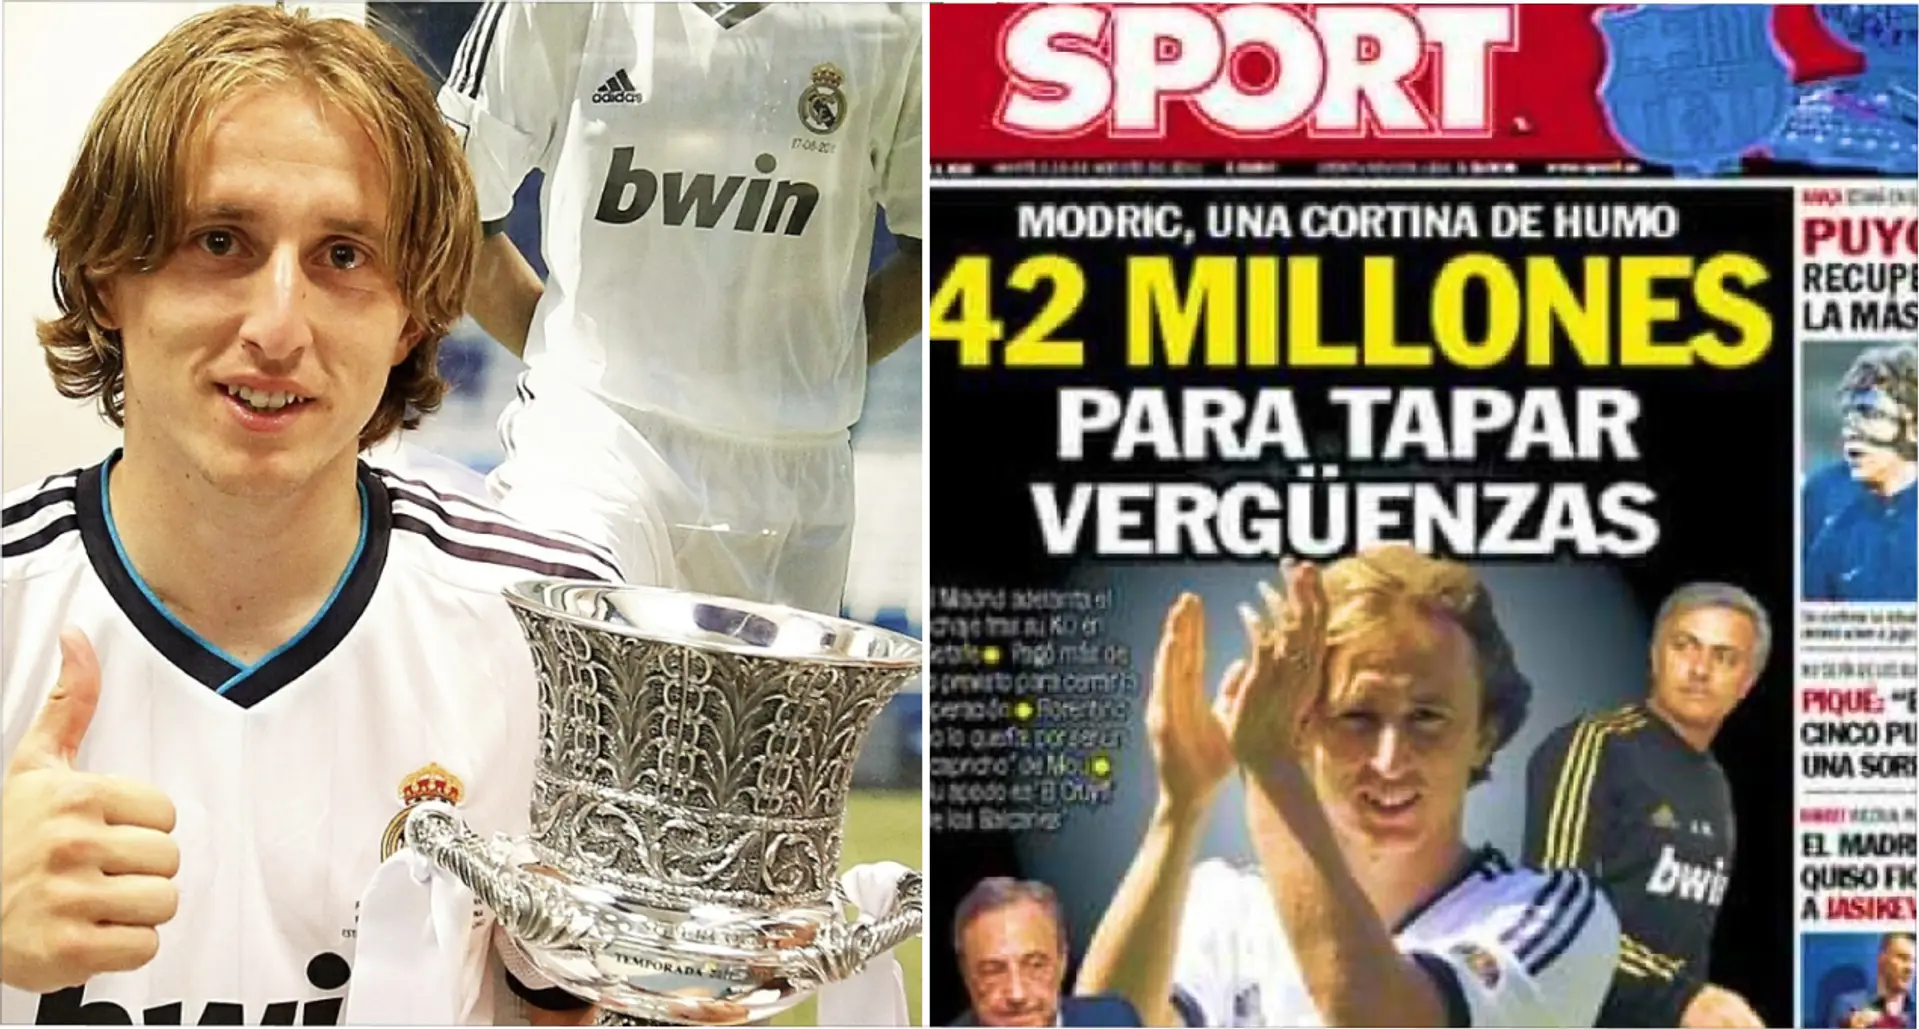 Recalling what Spanish newspapers were saying about Modric in 2012 – they couldn't be more WRONG